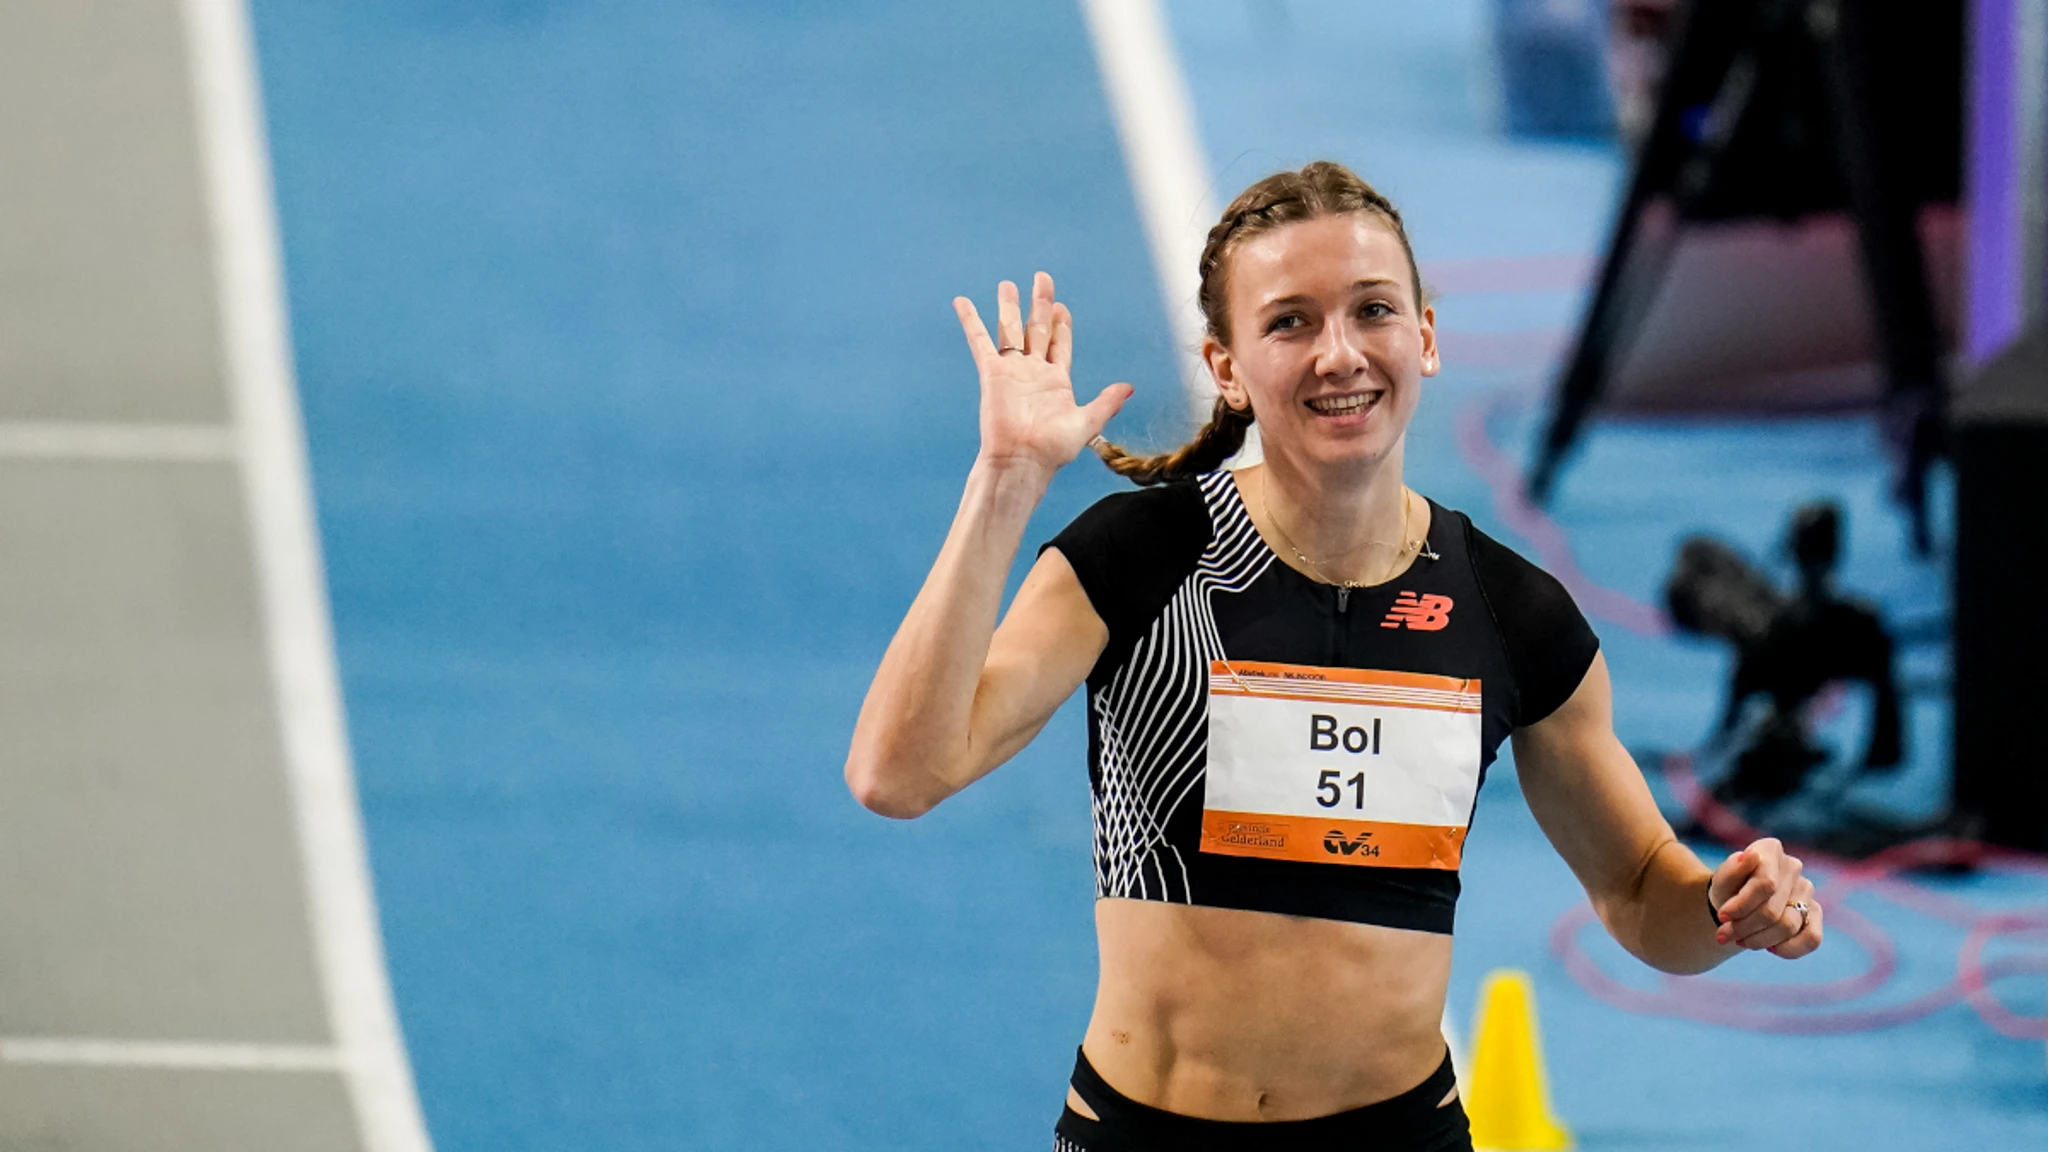 Dutch runner Bol races to another world indoor 400 record